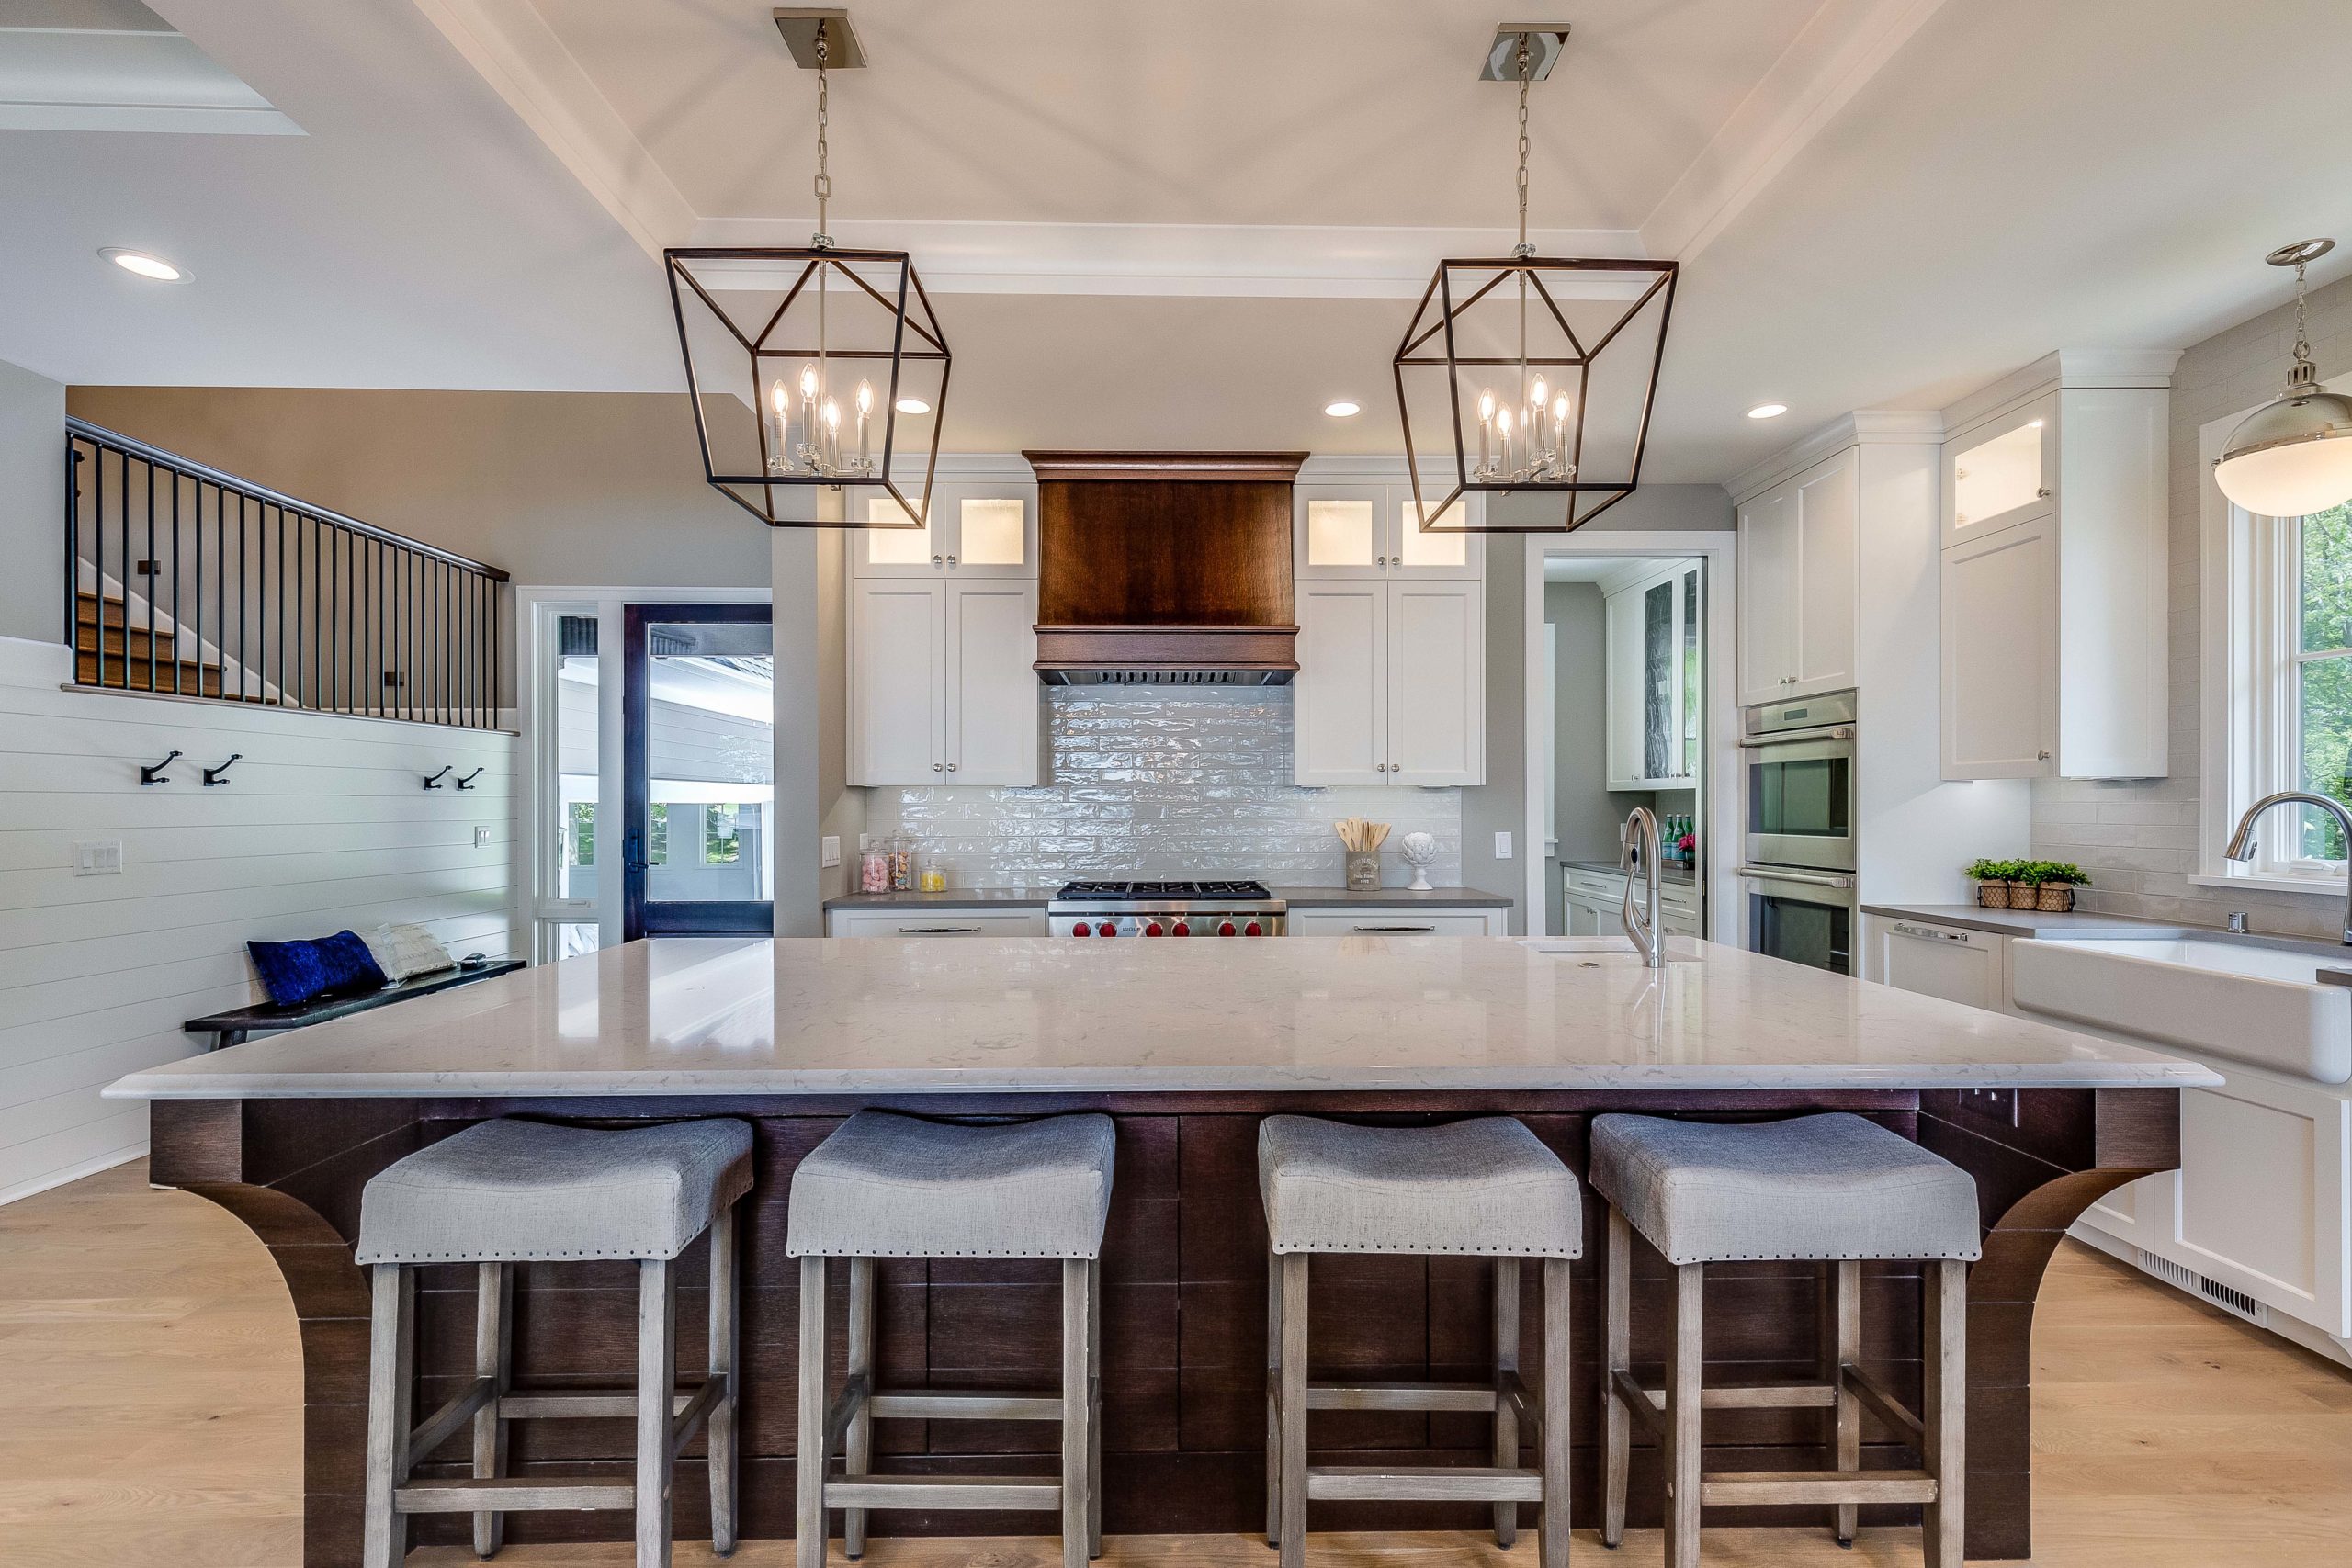 A kitchen with a large island and stools.